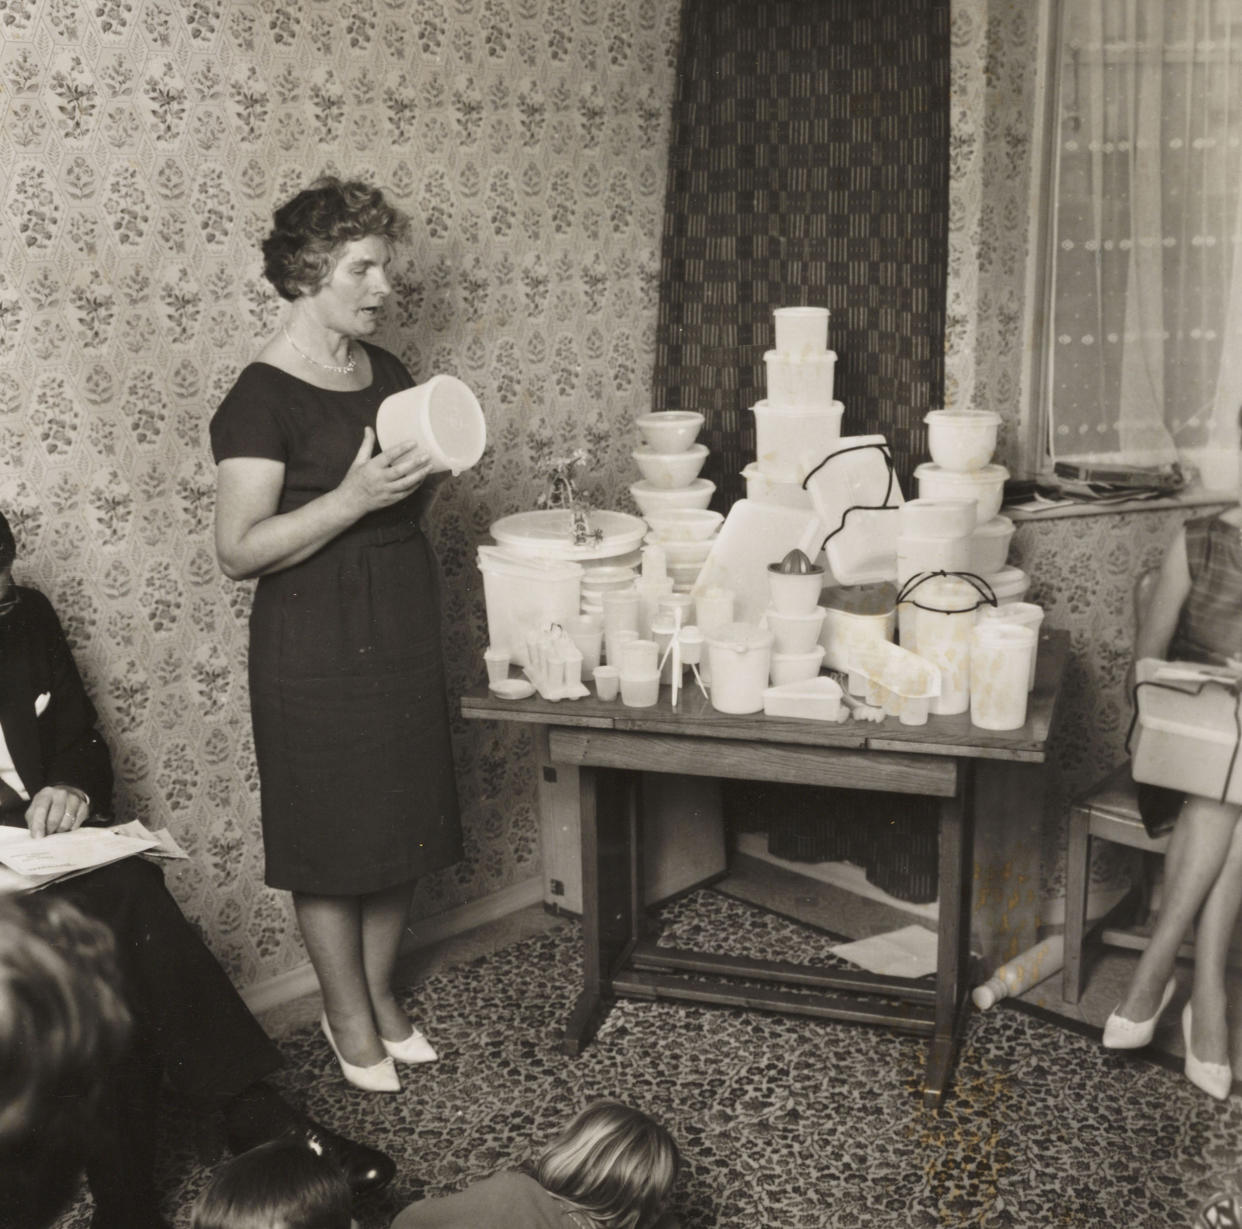 Tupperware party, 1963. (Daily Herald Archive / SSPL via Getty Images)